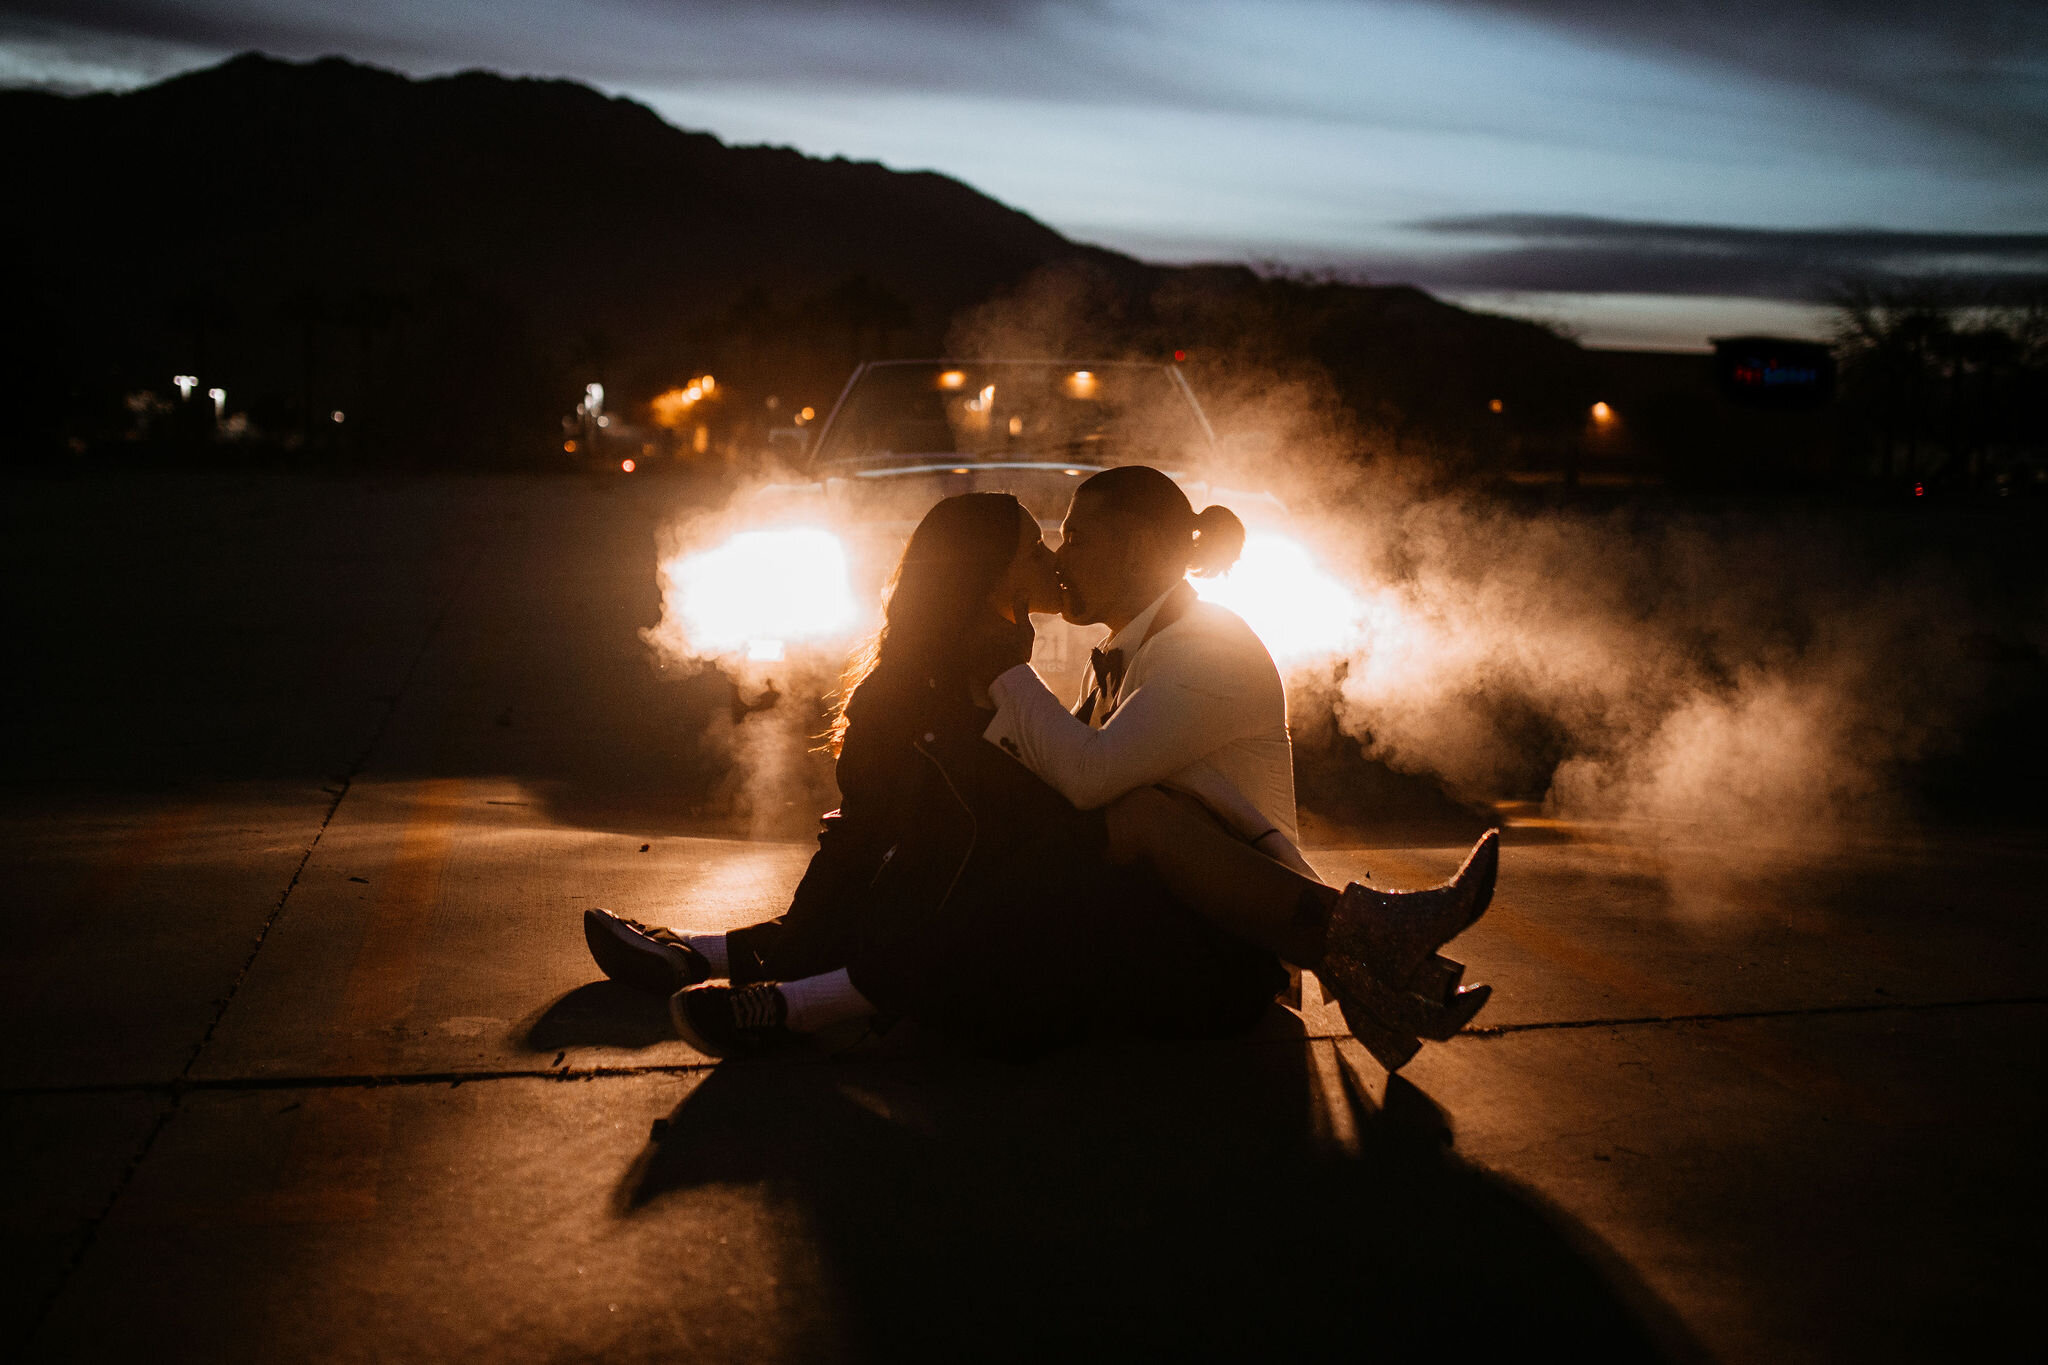 Car Lights at night Couples Photography